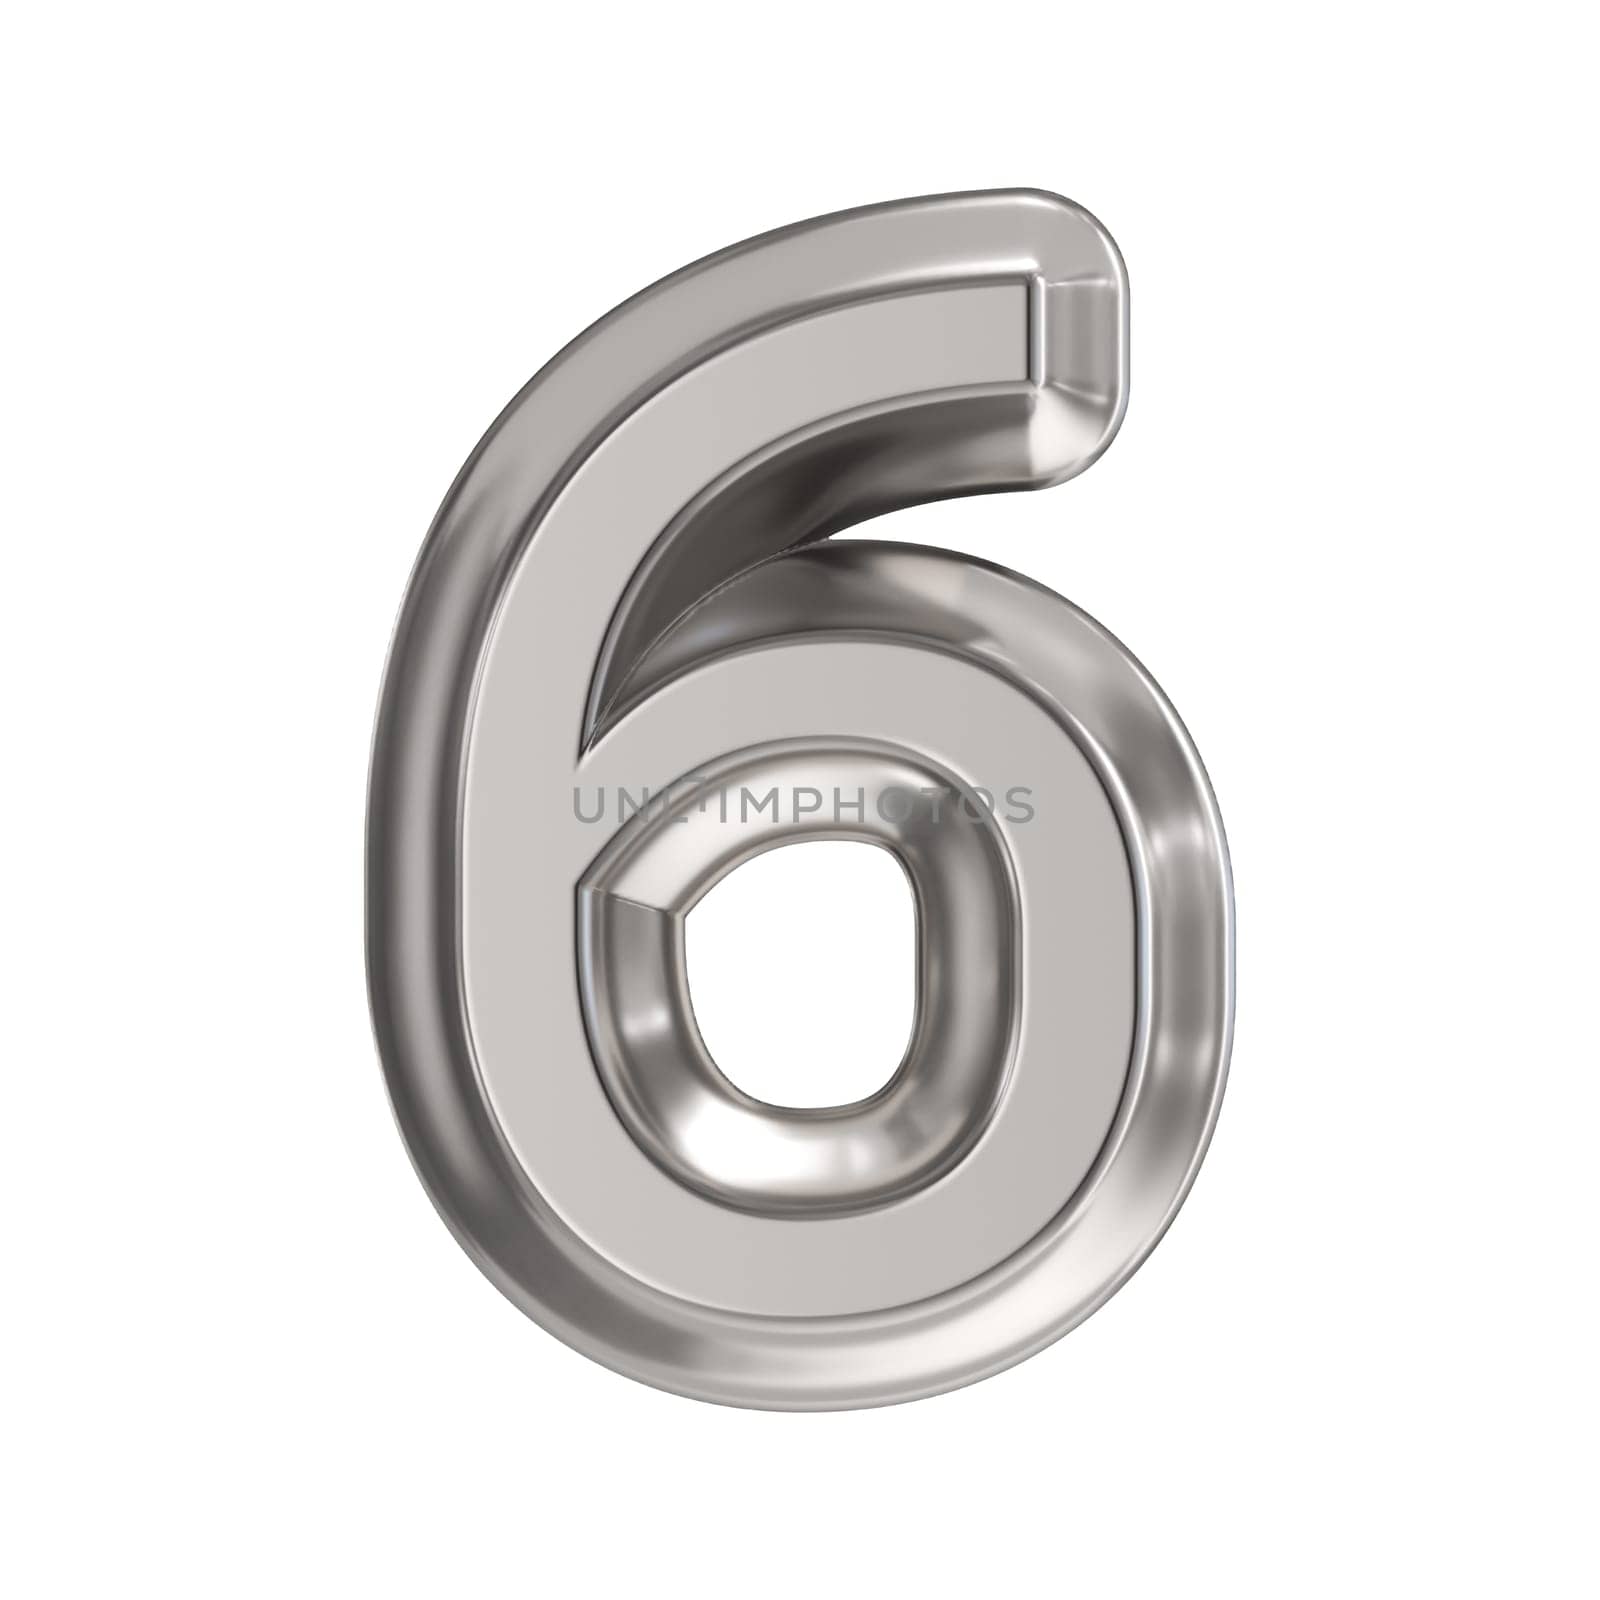 Steel font Number 6 SIX 3D rendering illustration isolated on white background